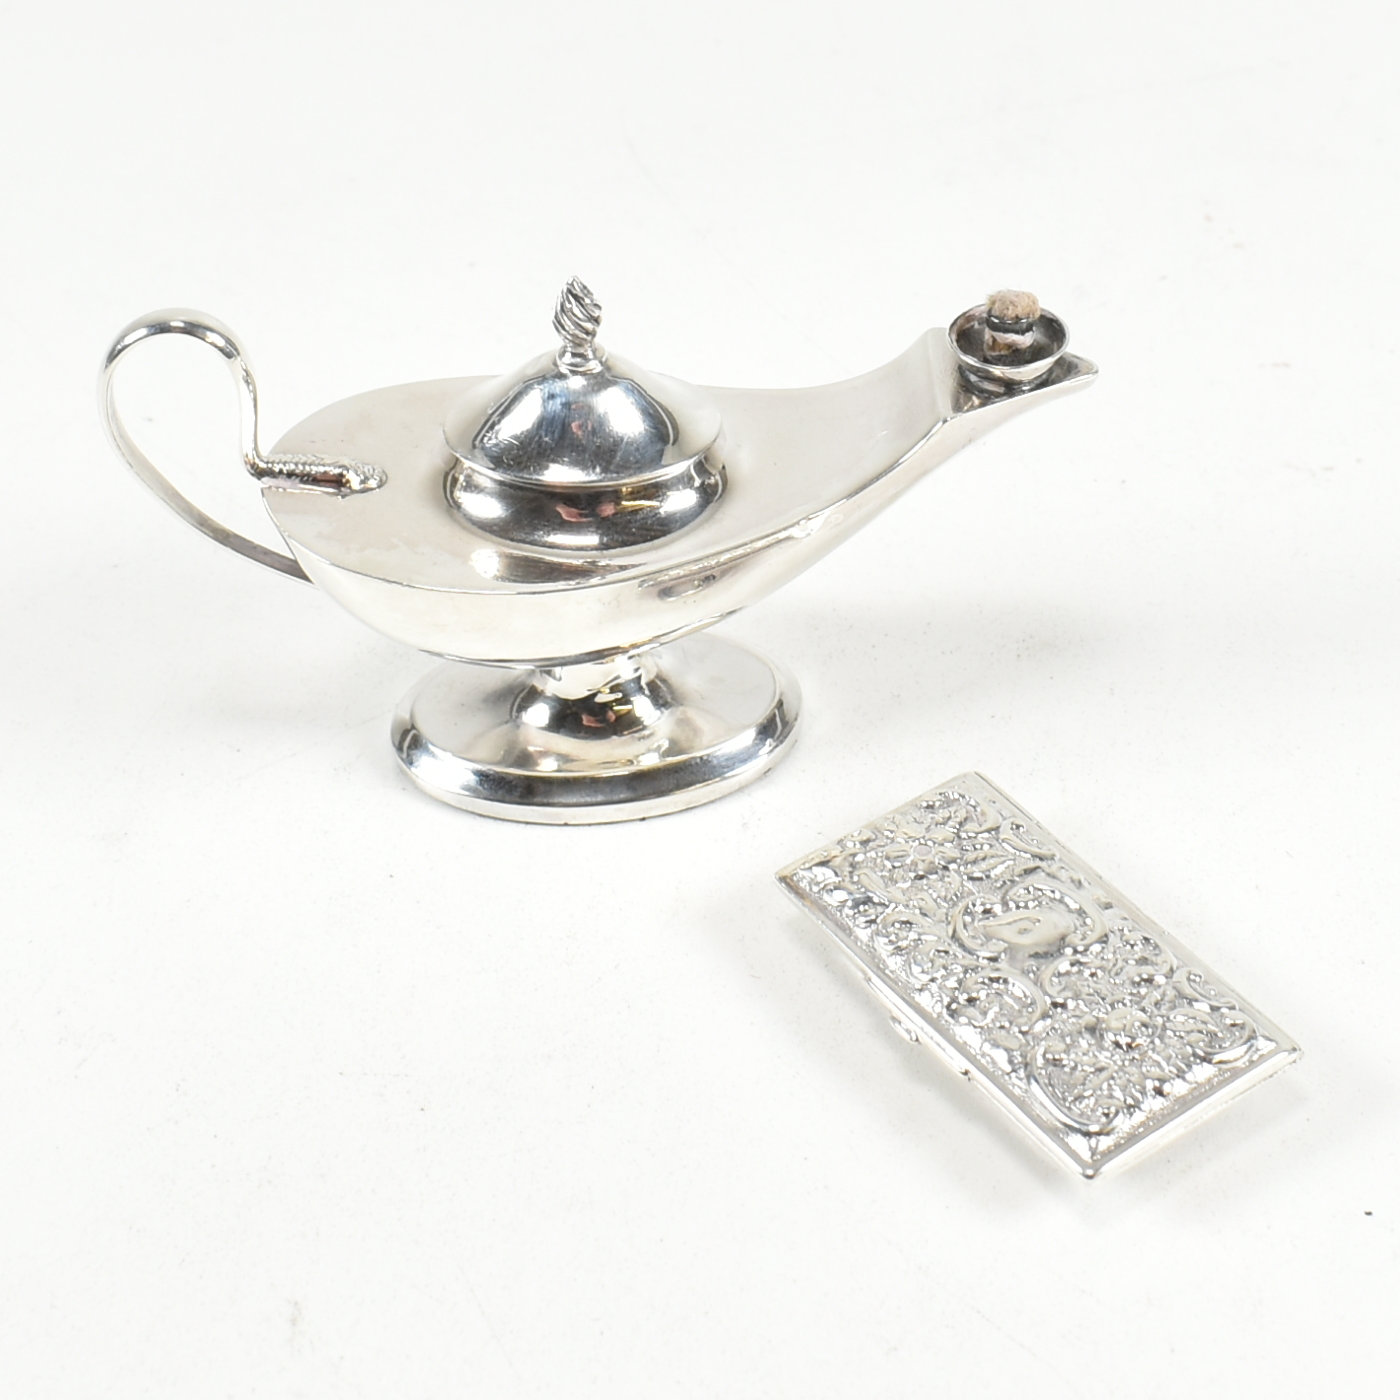 HALLMARKED SILVER MINIATURE OIL LAMP AND CHATELAINE PILL BOX - Image 2 of 8